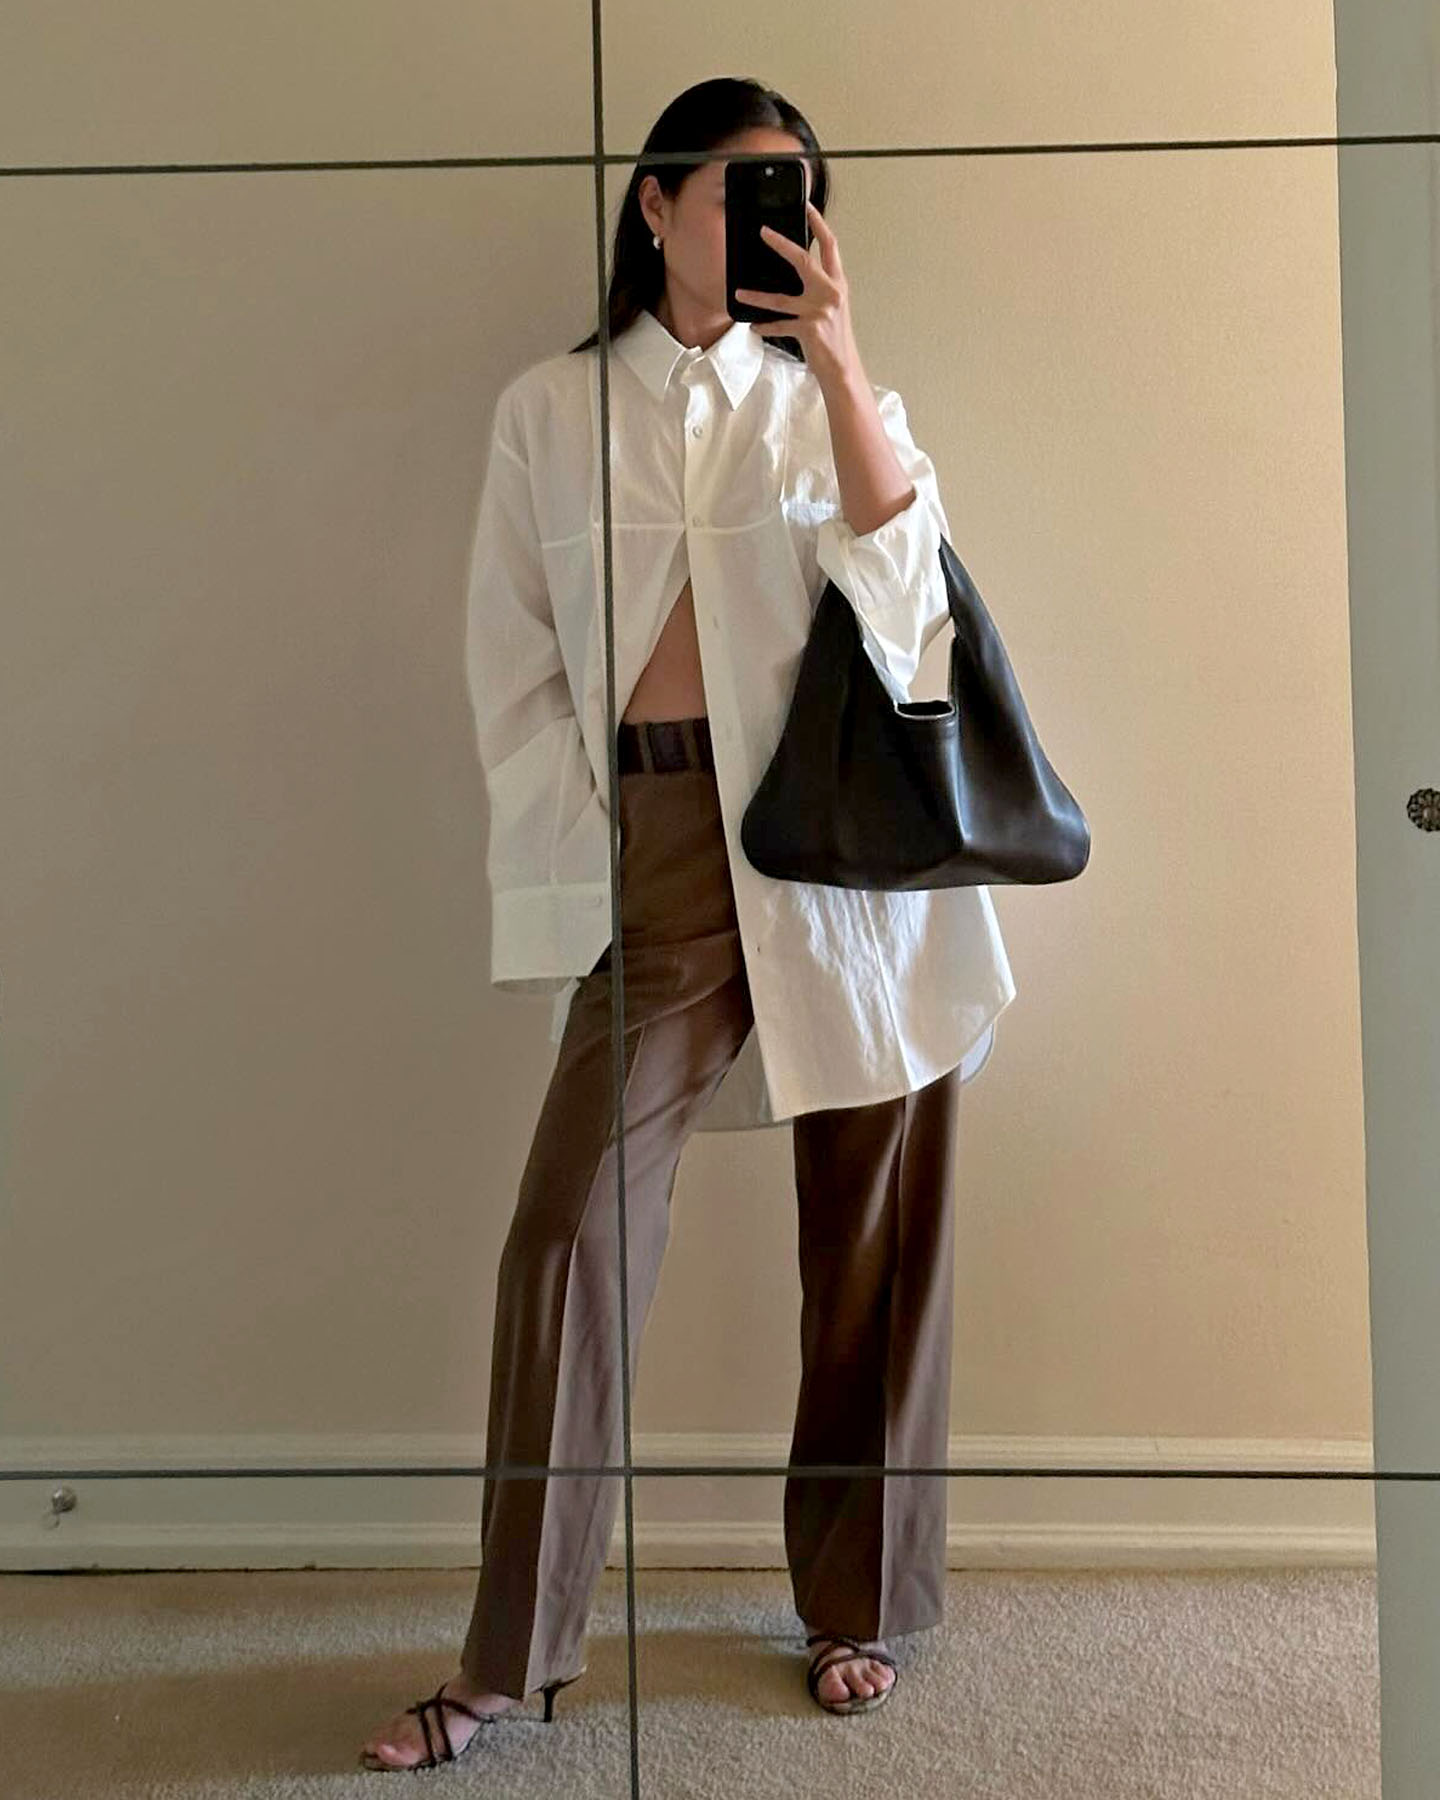 a stylish women poses for a mirror selfie wearing an oversize white button-down shirt, minimalistic black shoulder bag, belted brown trousers, and strappy black sandals